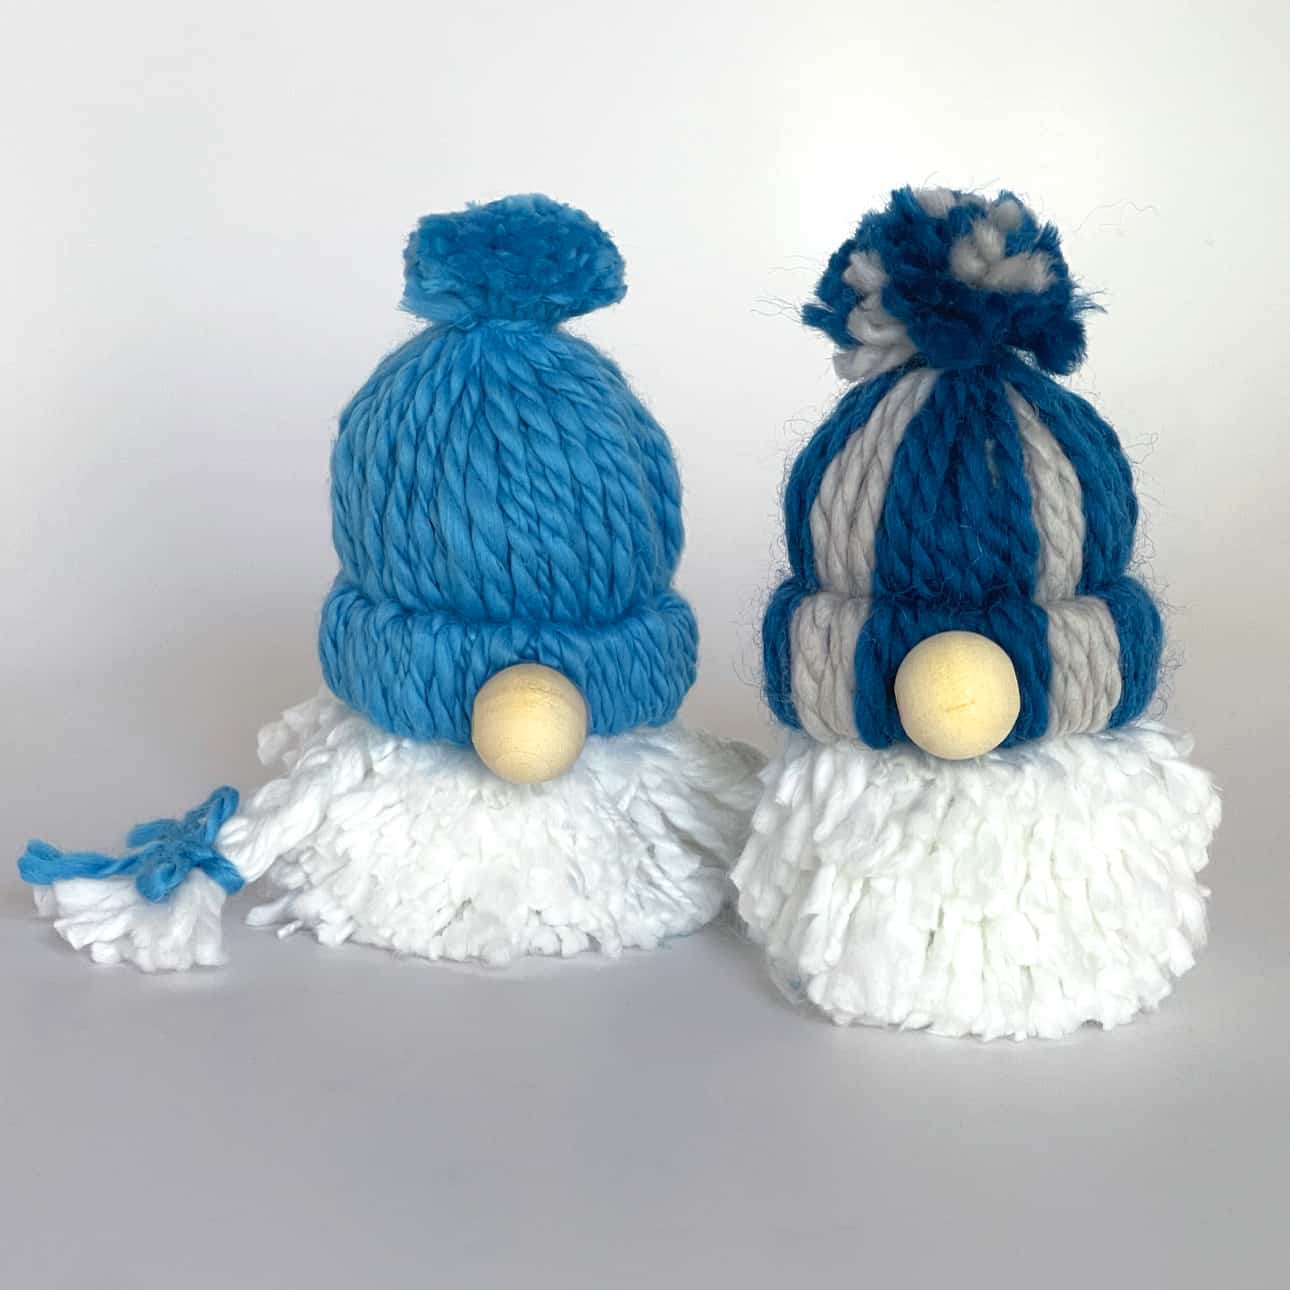 Two yarn gnome ornaments made with pom poms and a wooden nose in blue and white colors.